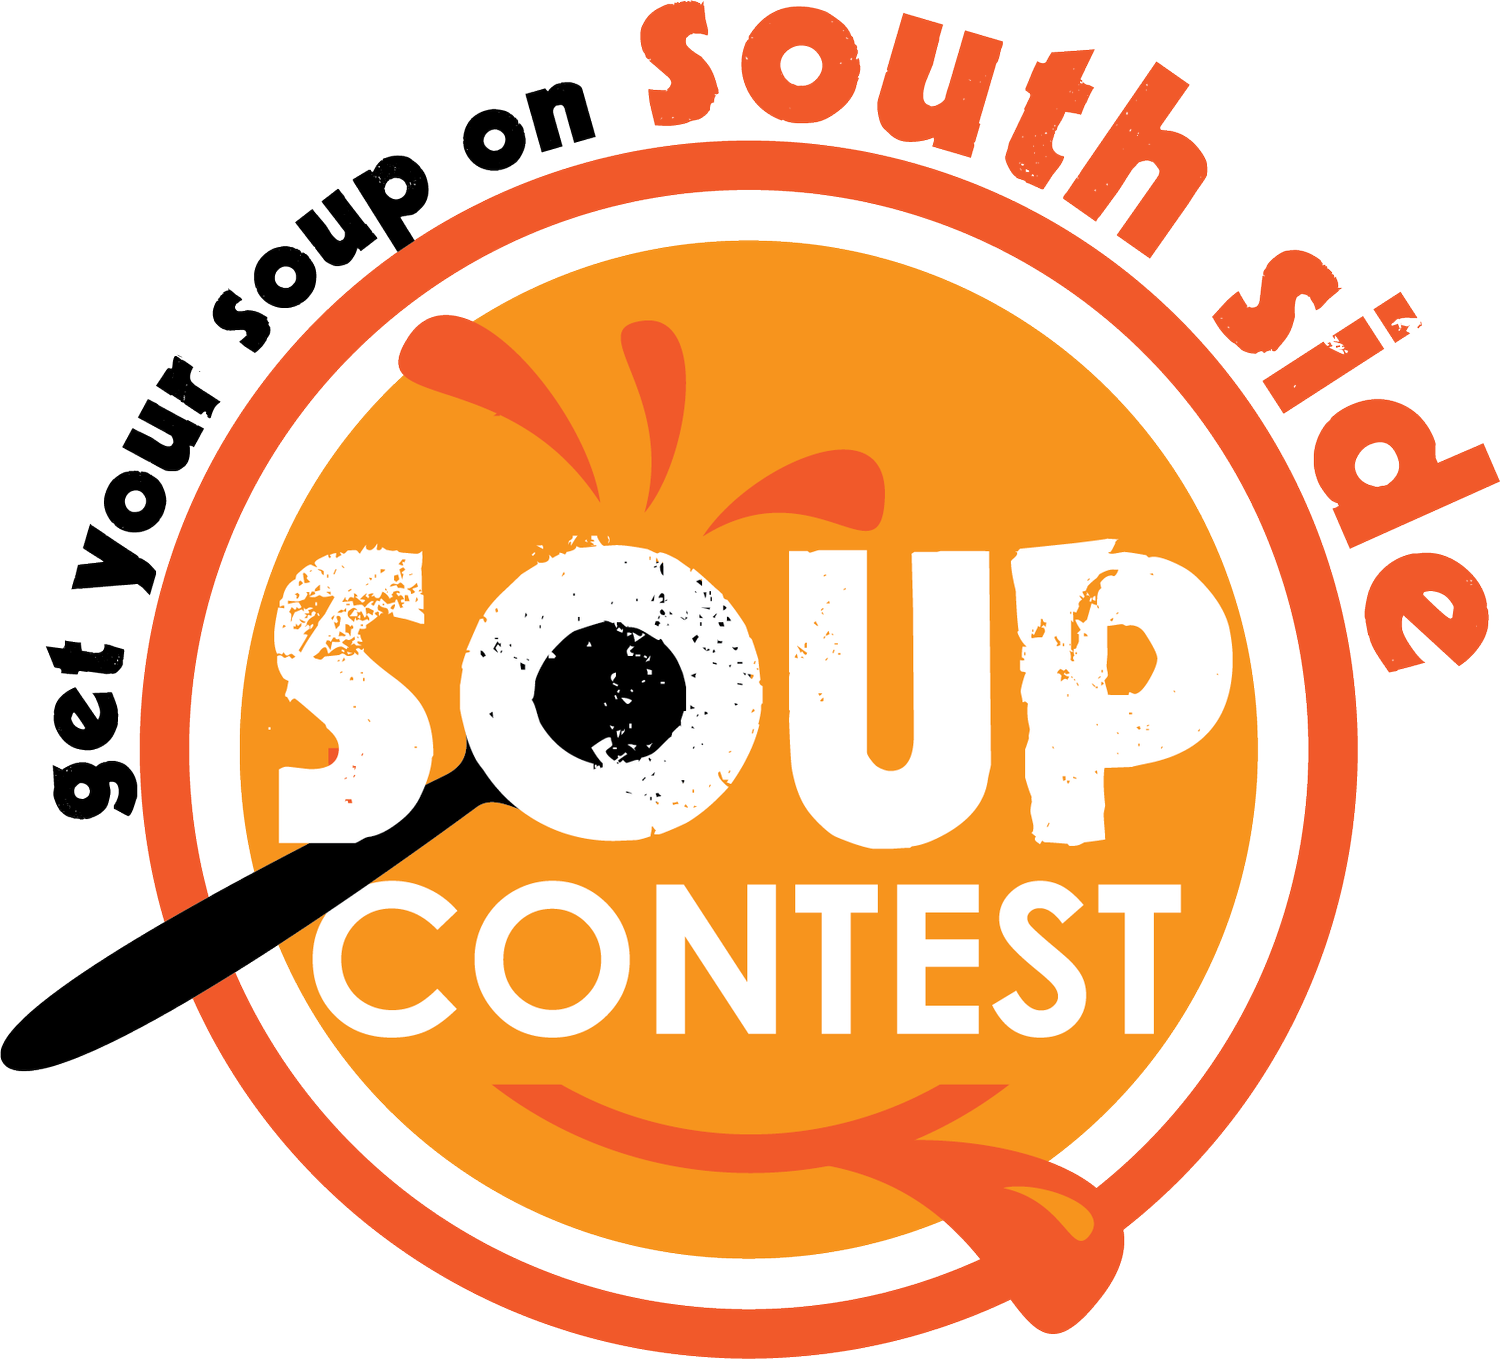 South Side Soup Contest | Benefitting the Brashear Association Food Pantry and the South Side Chamber of Commerce